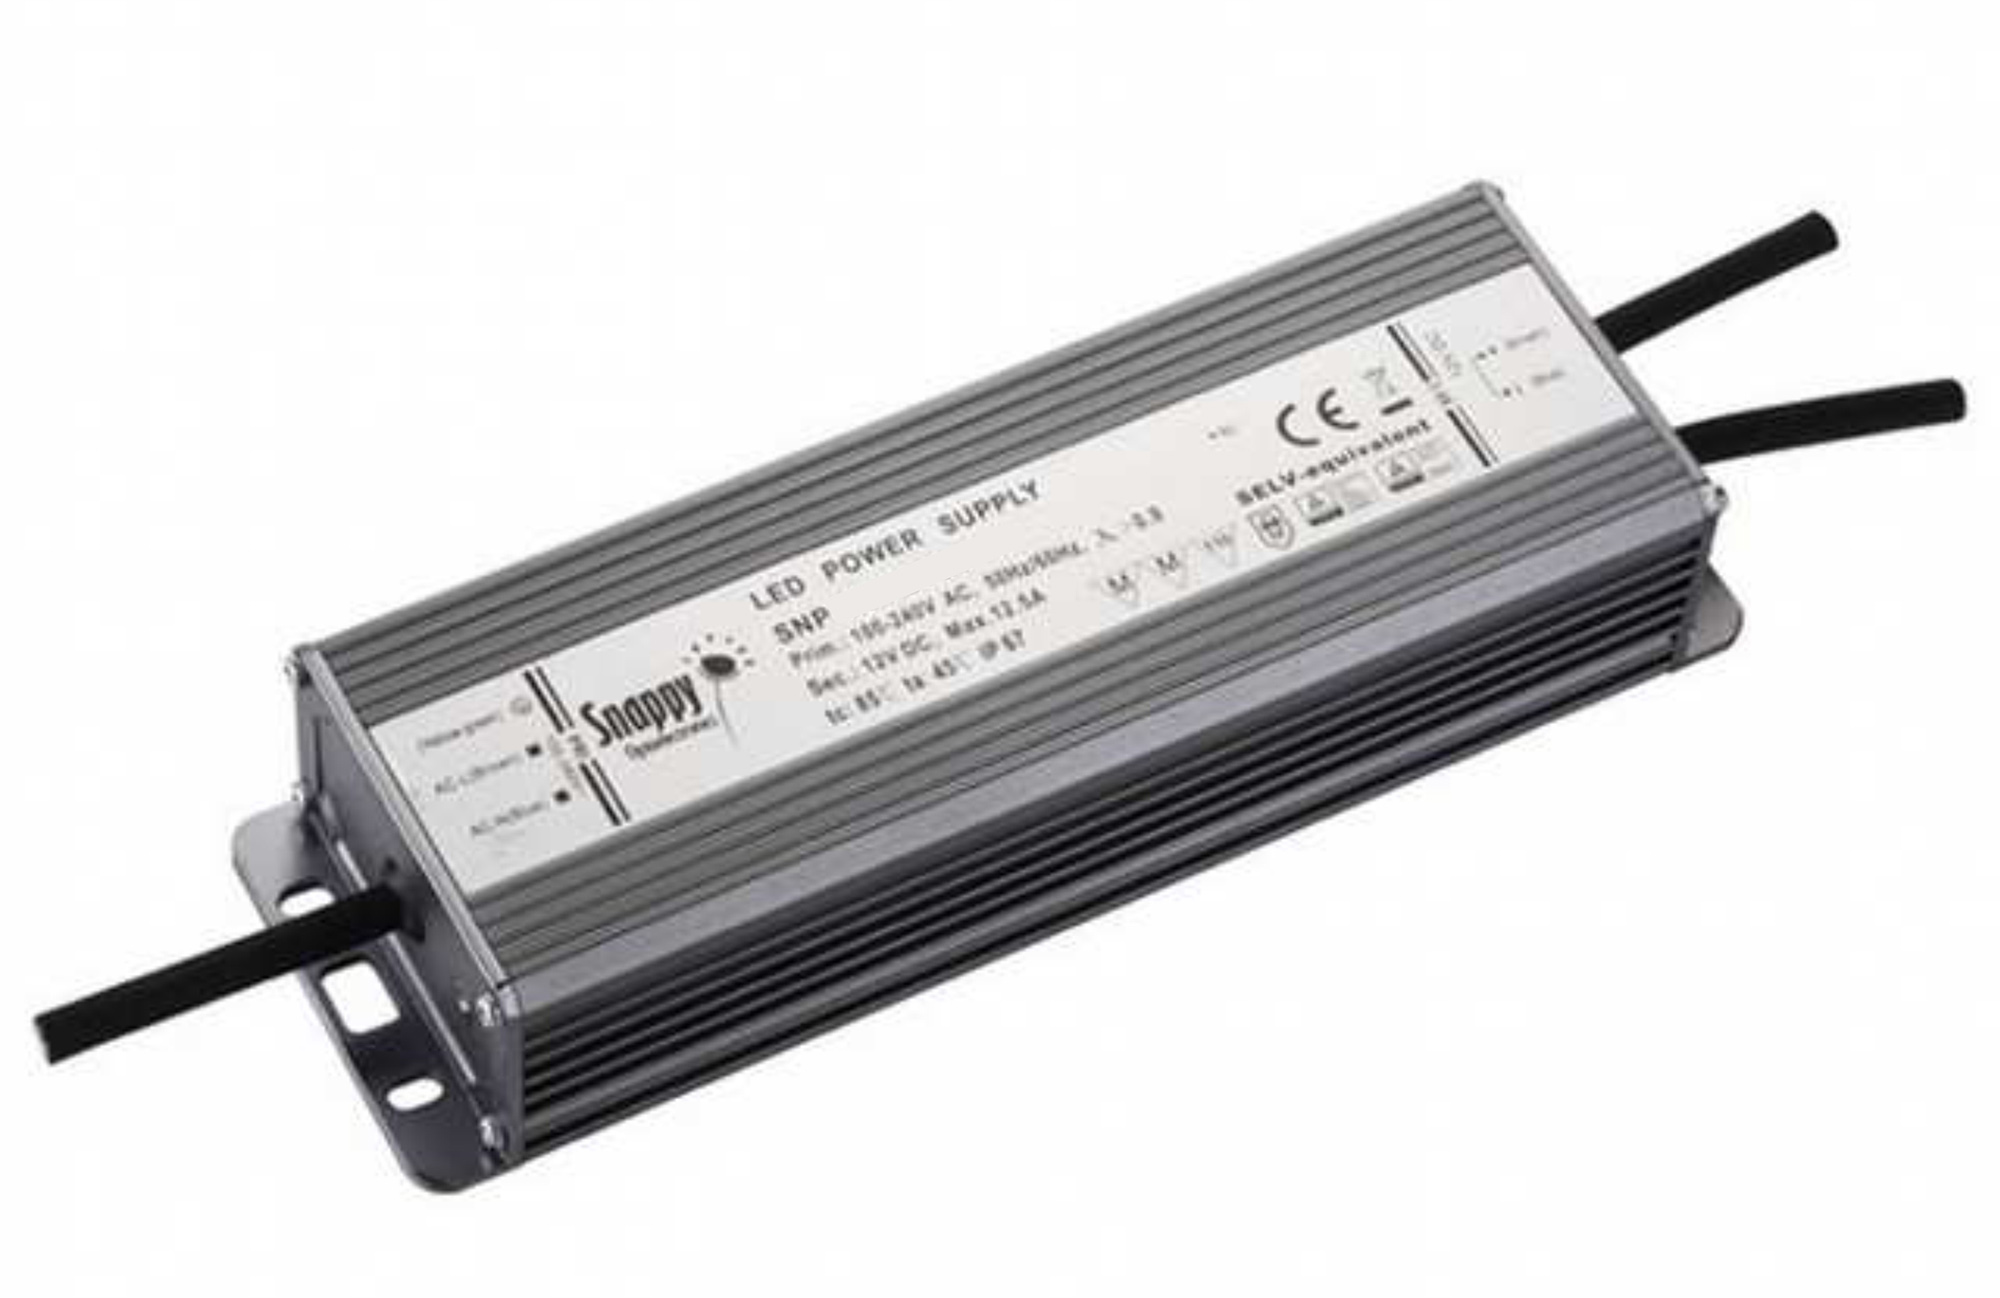 SPE150-24VLP  SPE, 150W, Constant Voltage Non Dimmable Aluminum LED Driver, 24VDC, 6.25A, Pf>0.9, TC:+90?, TA:45?, IP67, Effi>90%, Screw Connection, 3yrs Warranty.